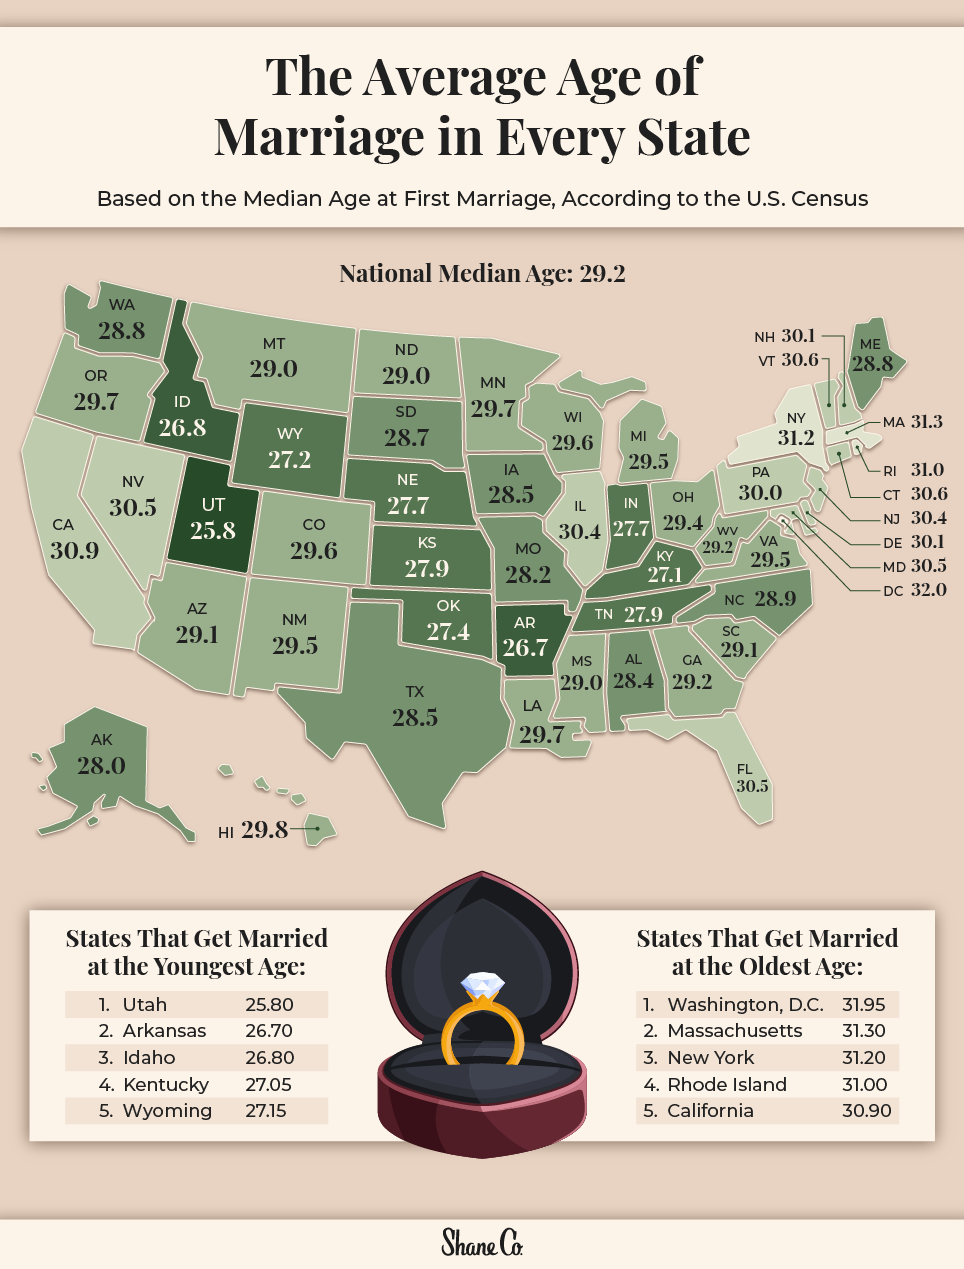 Heat map showing the average age of marriage in every U.S. state